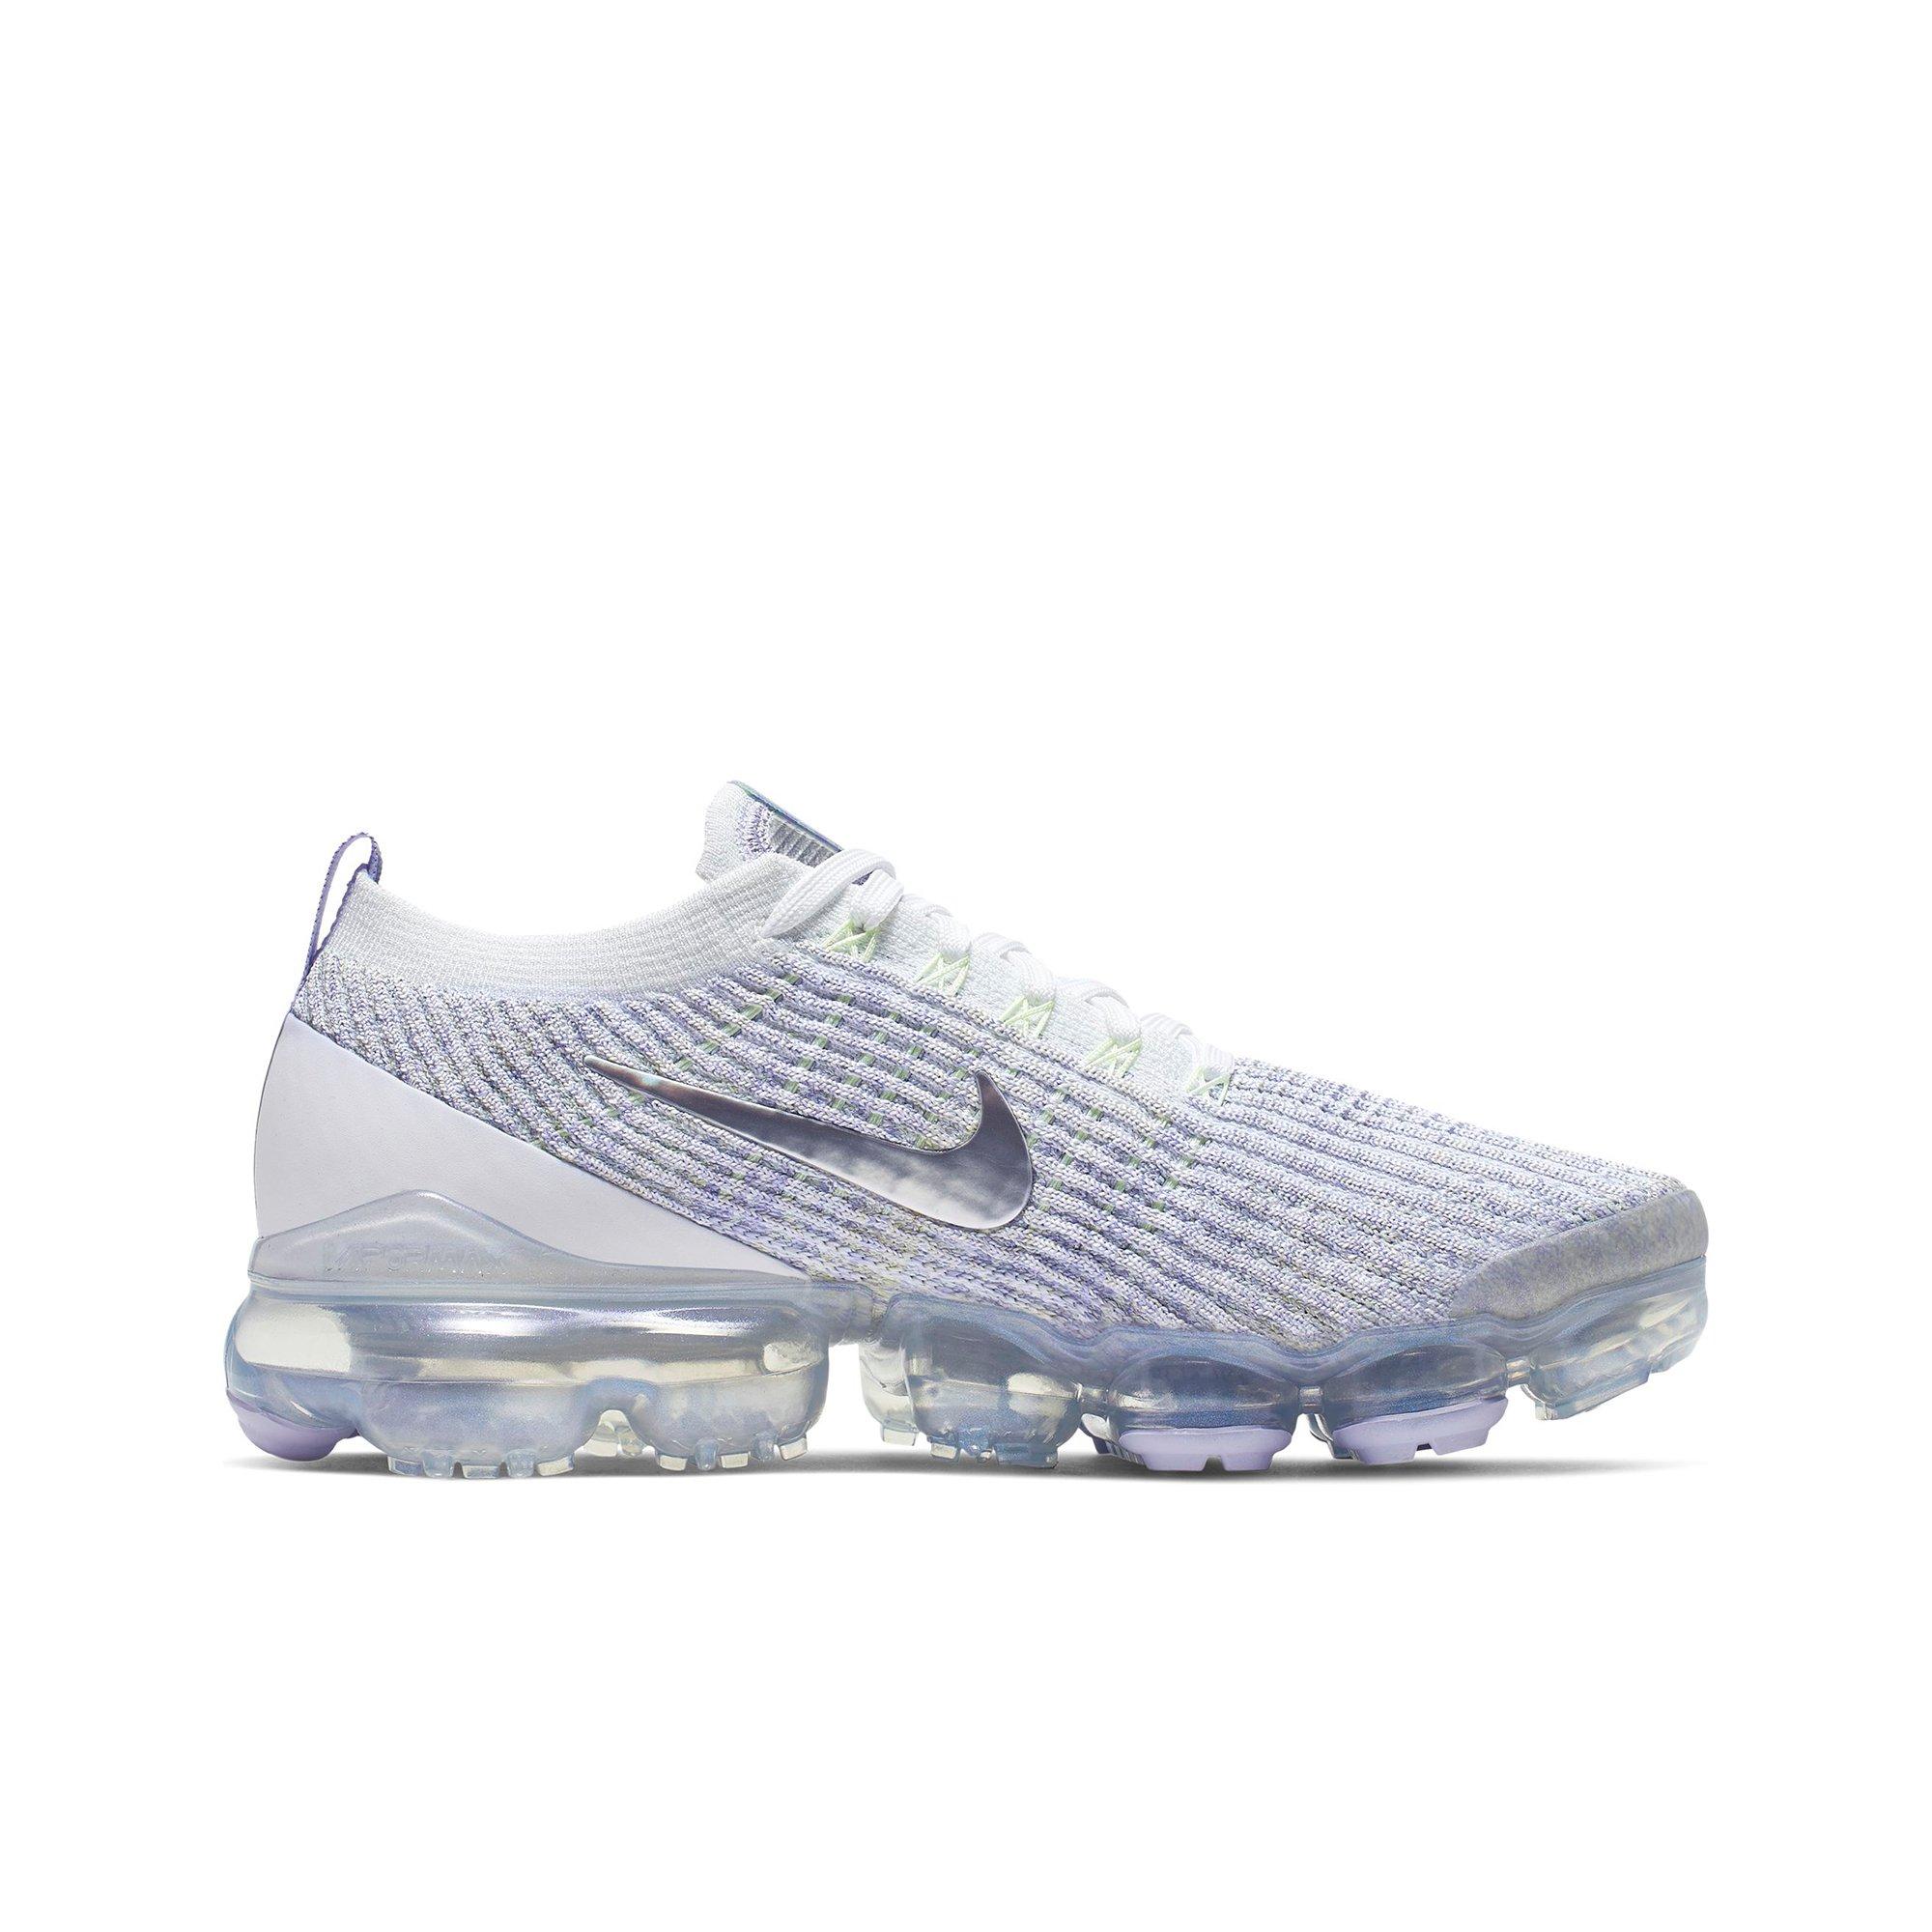 vapormax purple and white